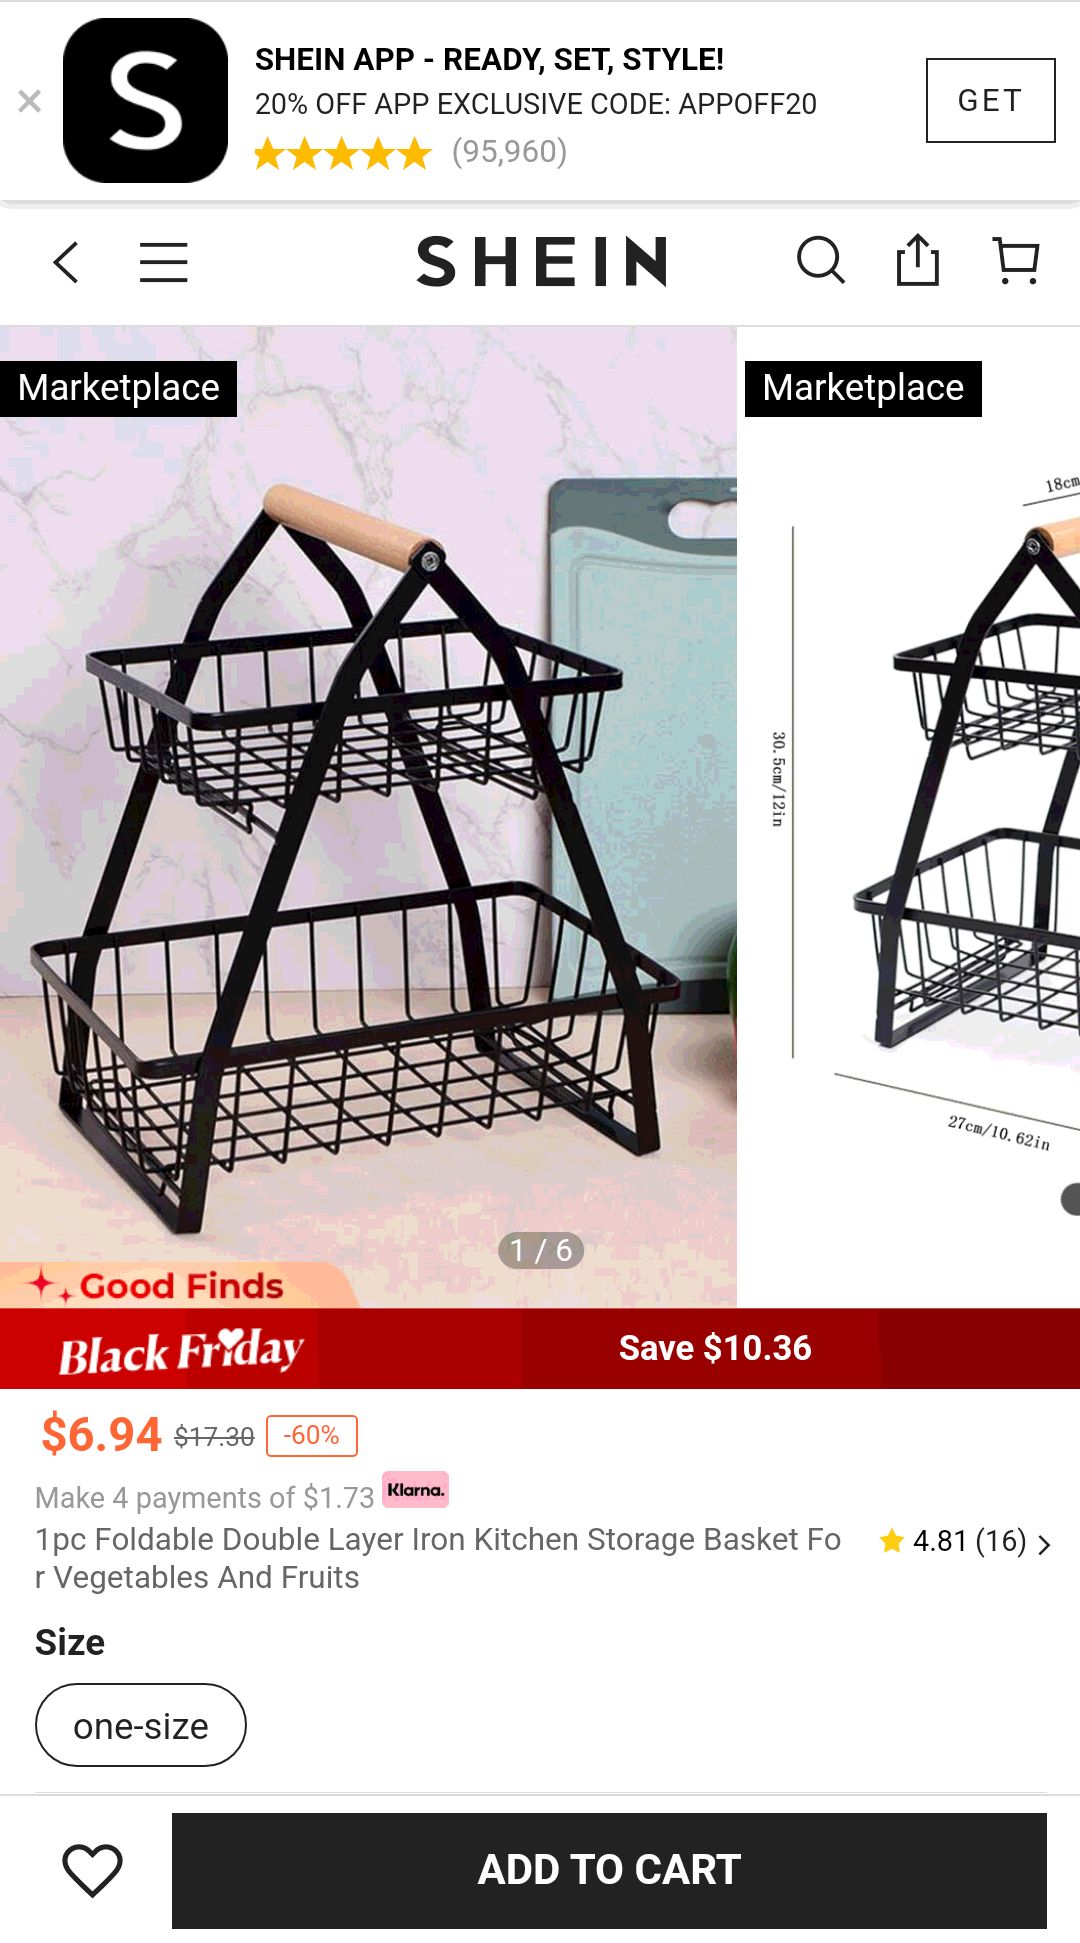 1pc Foldable Double Layer Iron Kitchen Storage Basket For Vegetables And Fruits | SHEIN USA